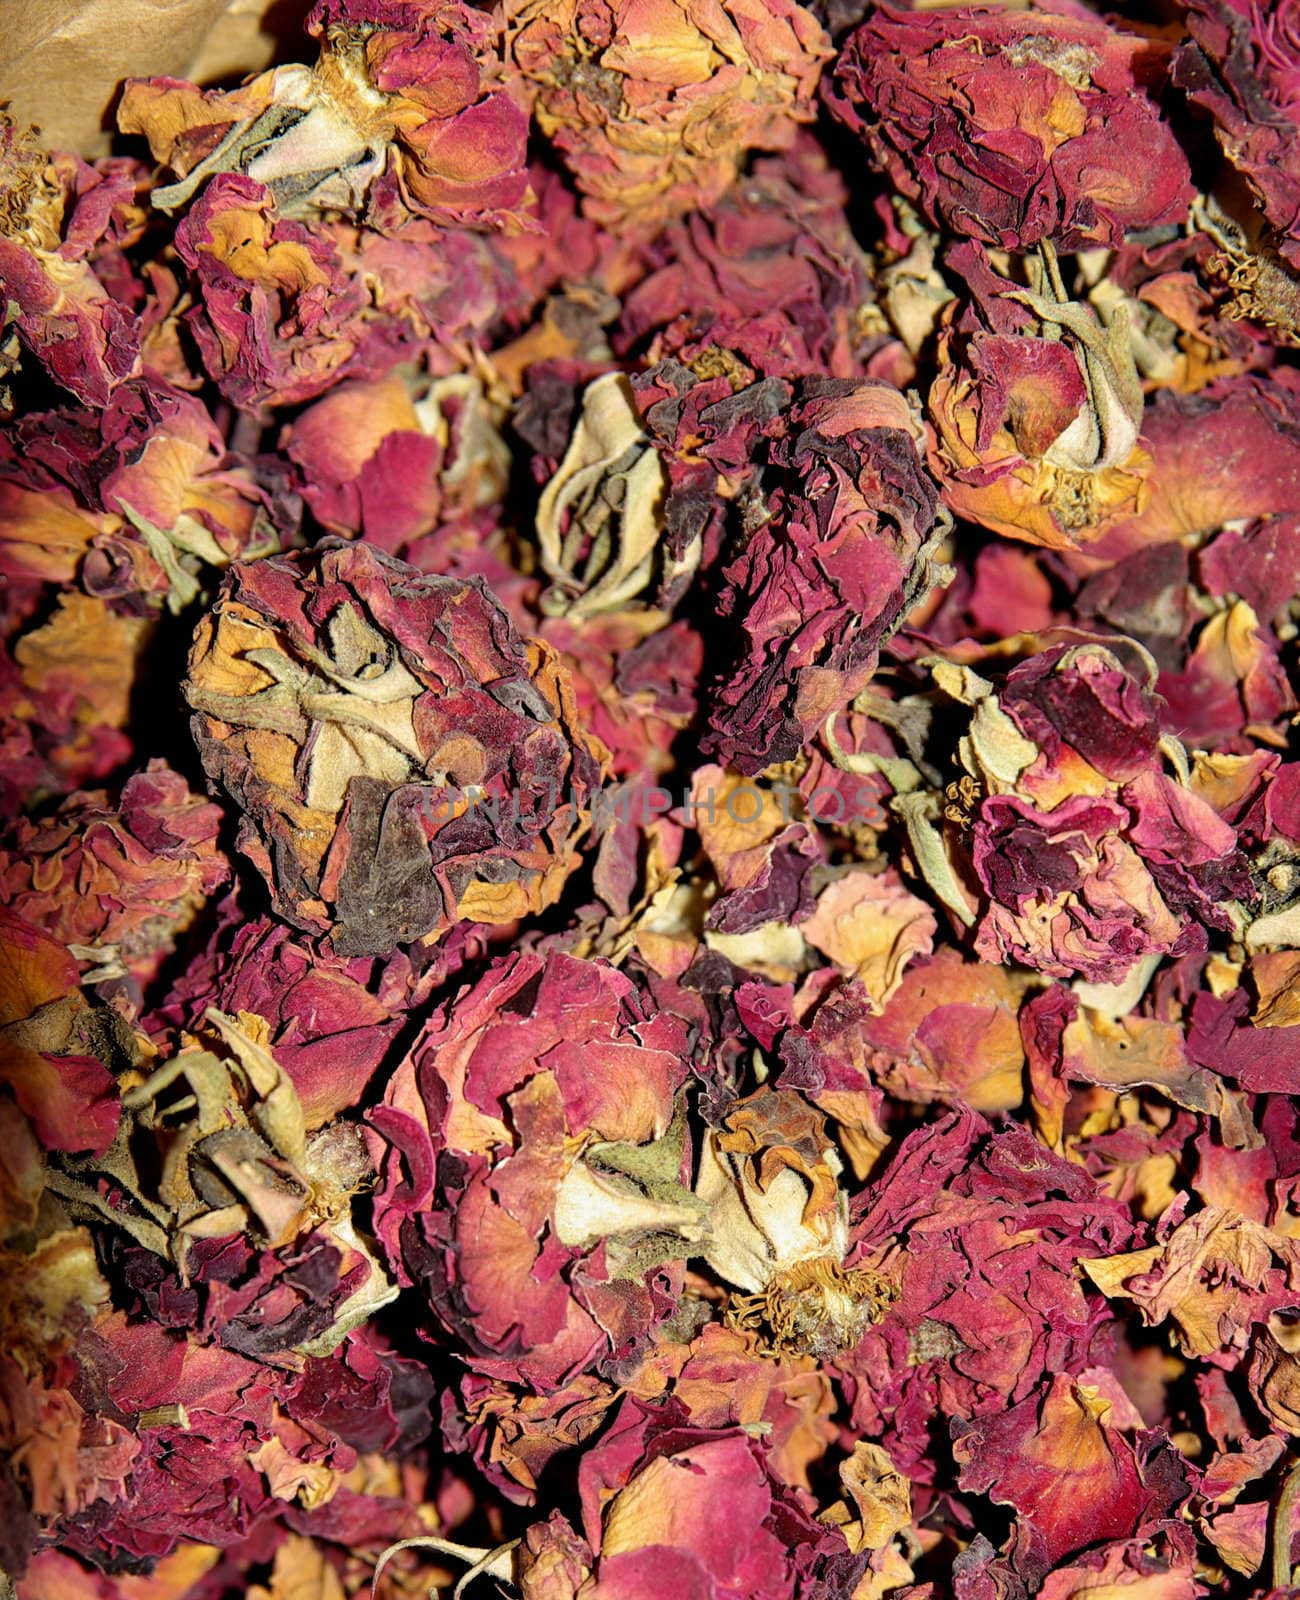 Dried rose petals by FotoFrank